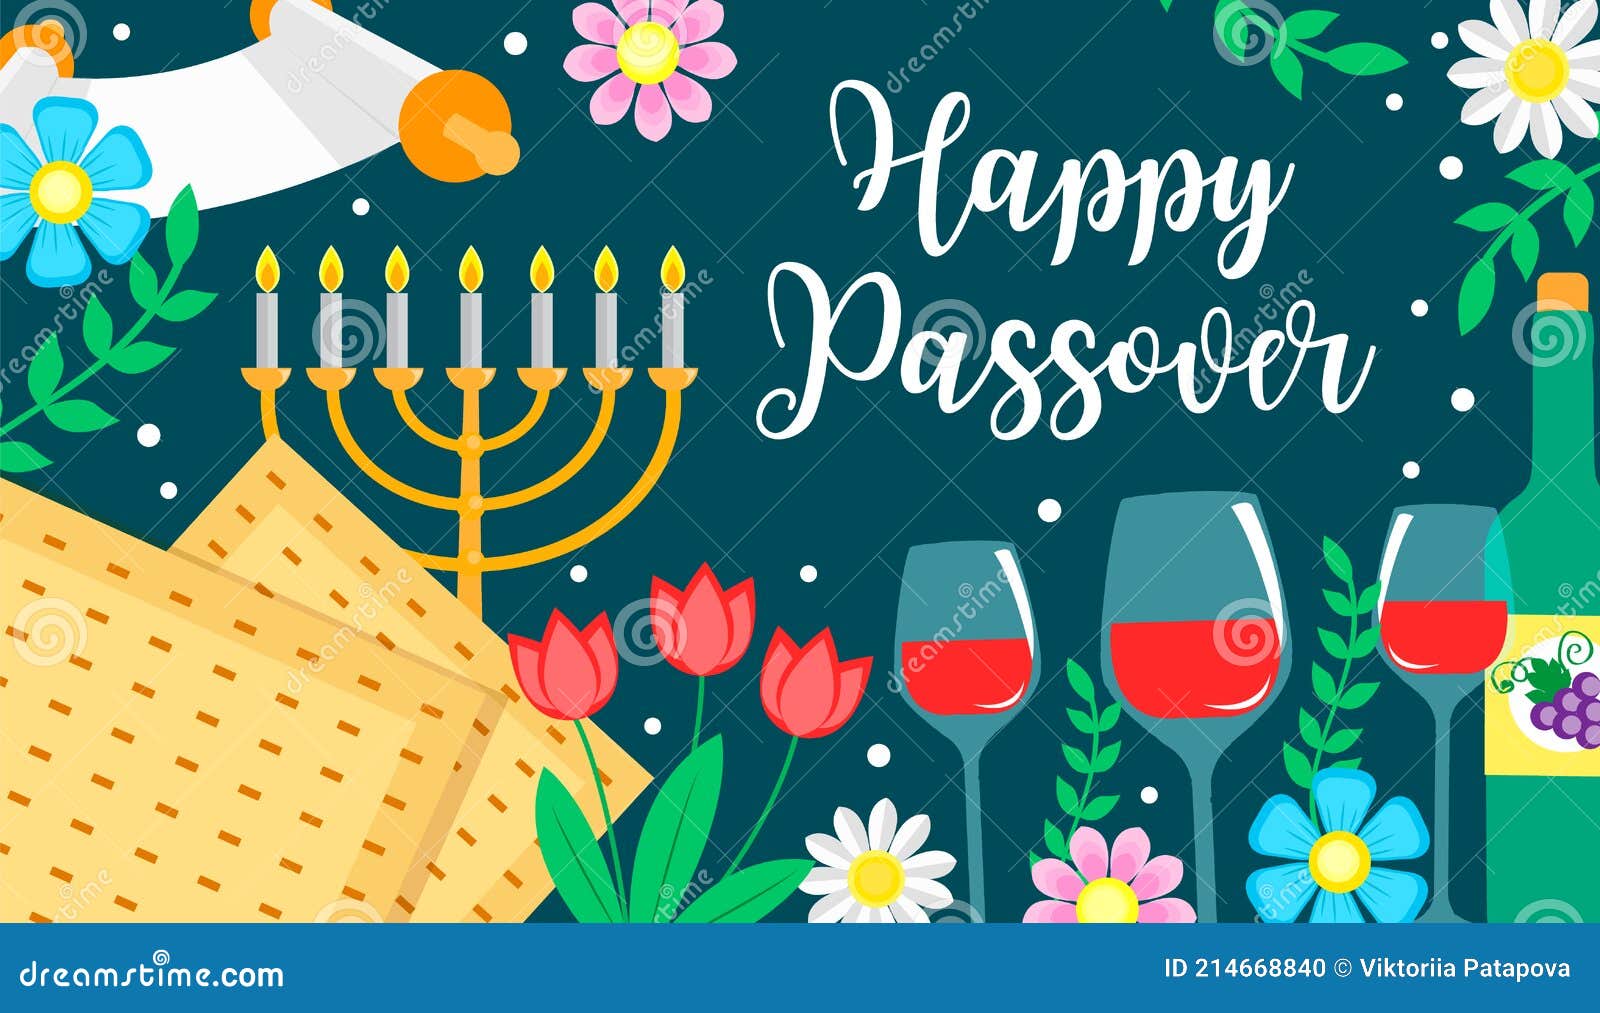 Jewish Holiday Passover Banner Design with Floral Decoration, Happy ...